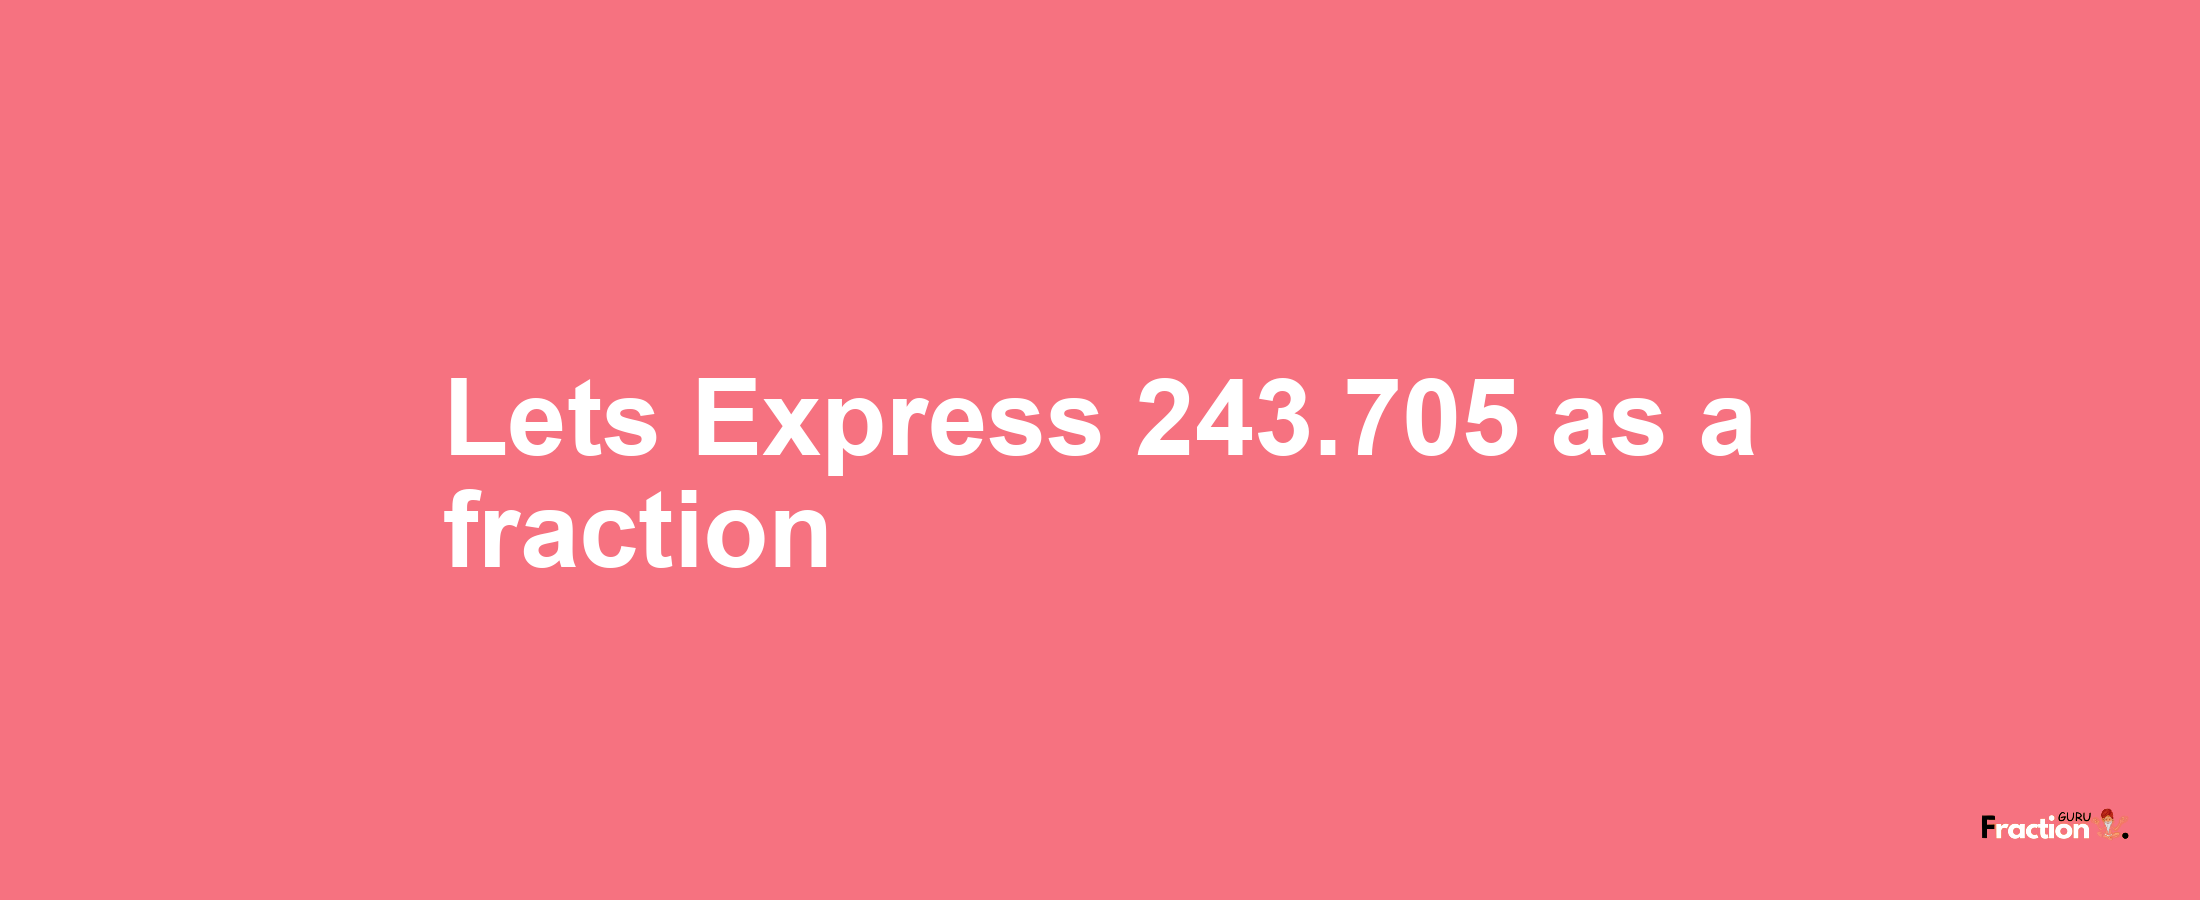 Lets Express 243.705 as afraction